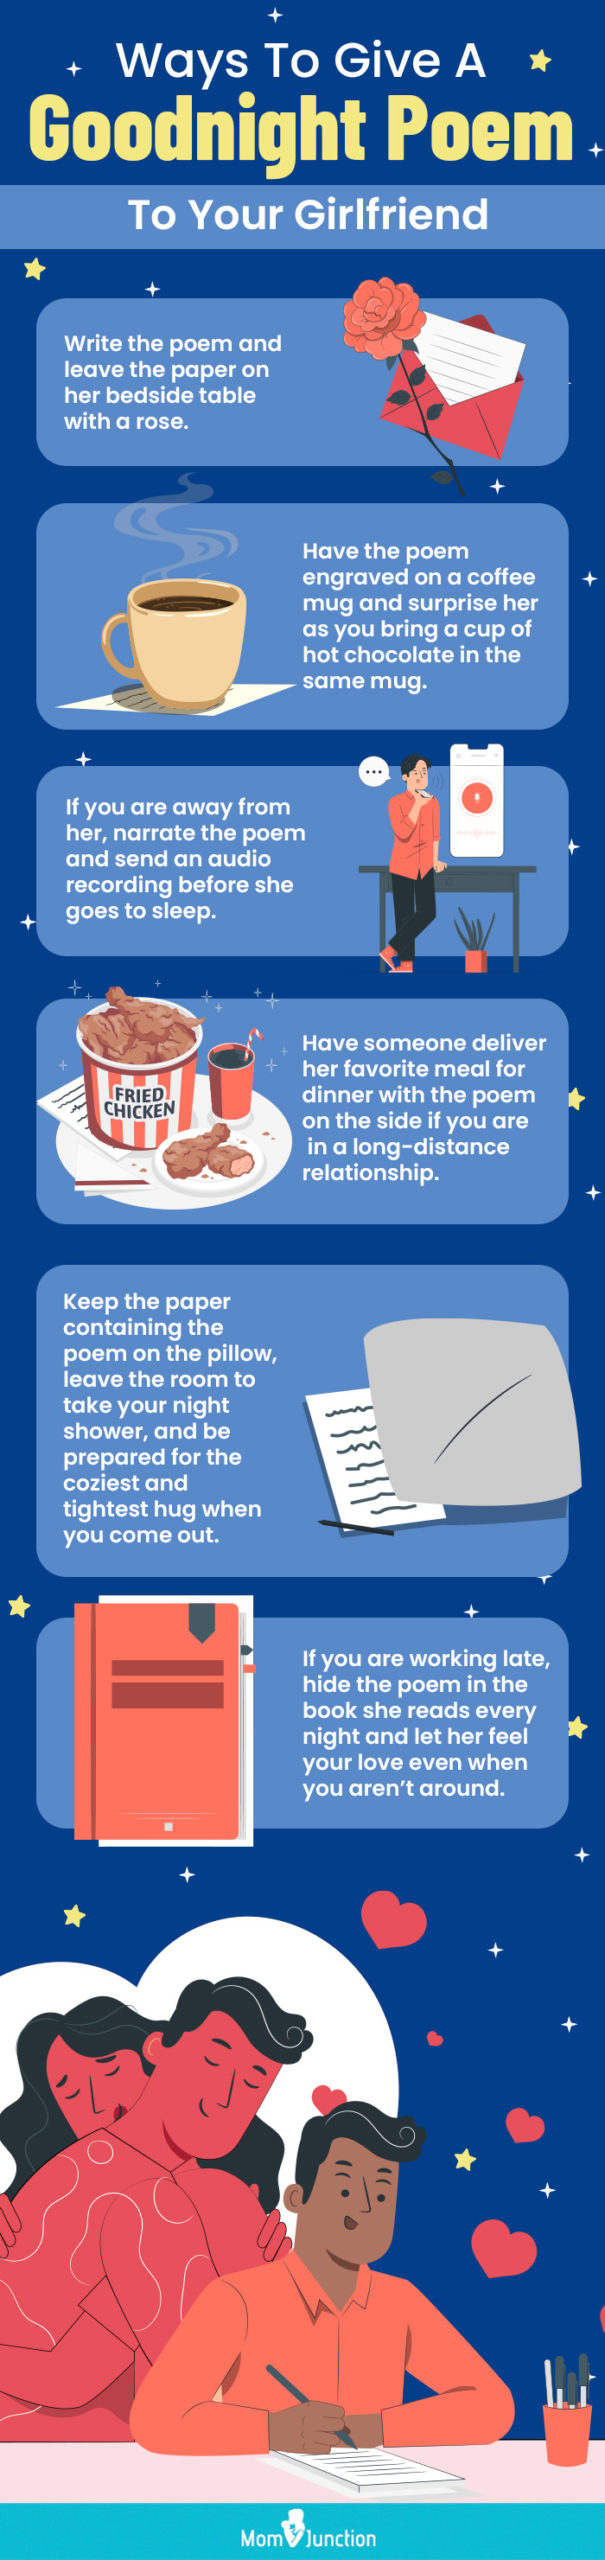 good night poem to girl friend [infographic]